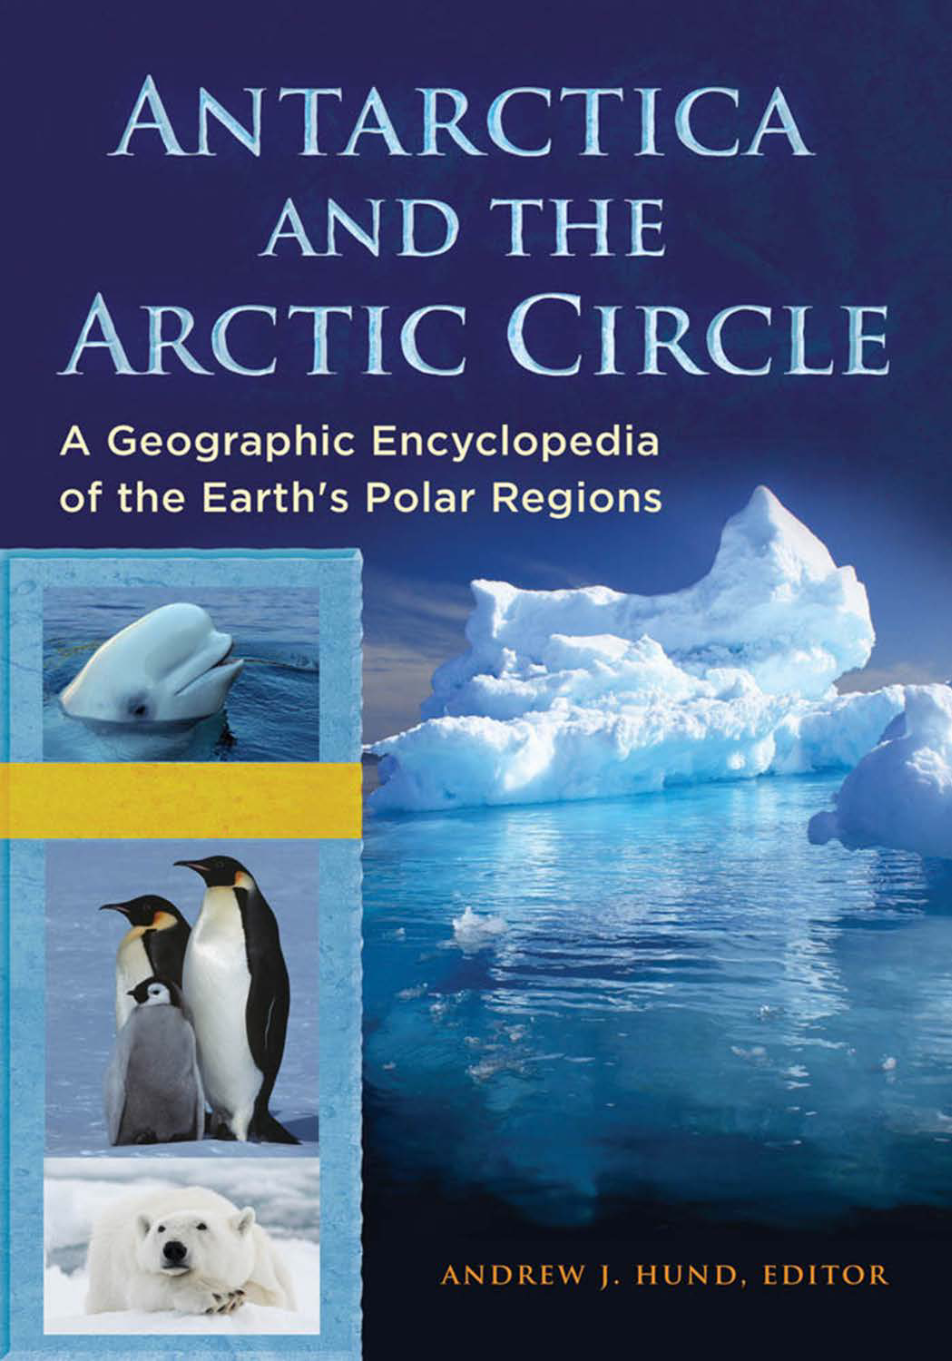 Antarctica and the Arctic Circle: A Geographic Encyclopedia of the Earth's Polar Regions [2 volumes] page Cover1